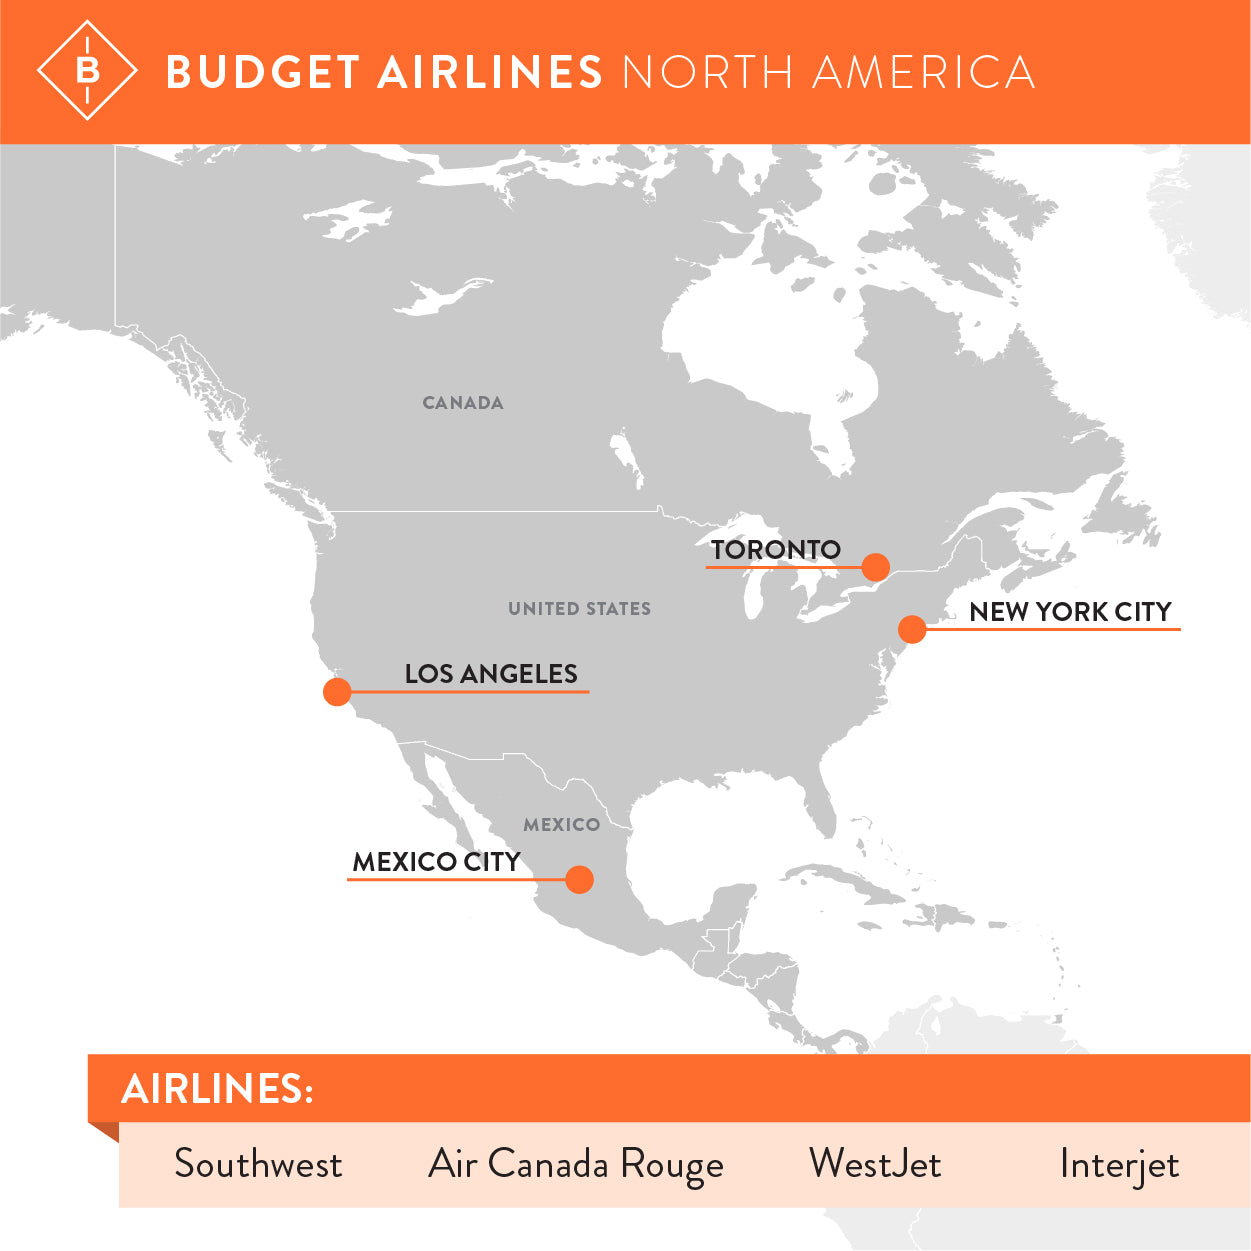 Low cost airline carriers in North America.